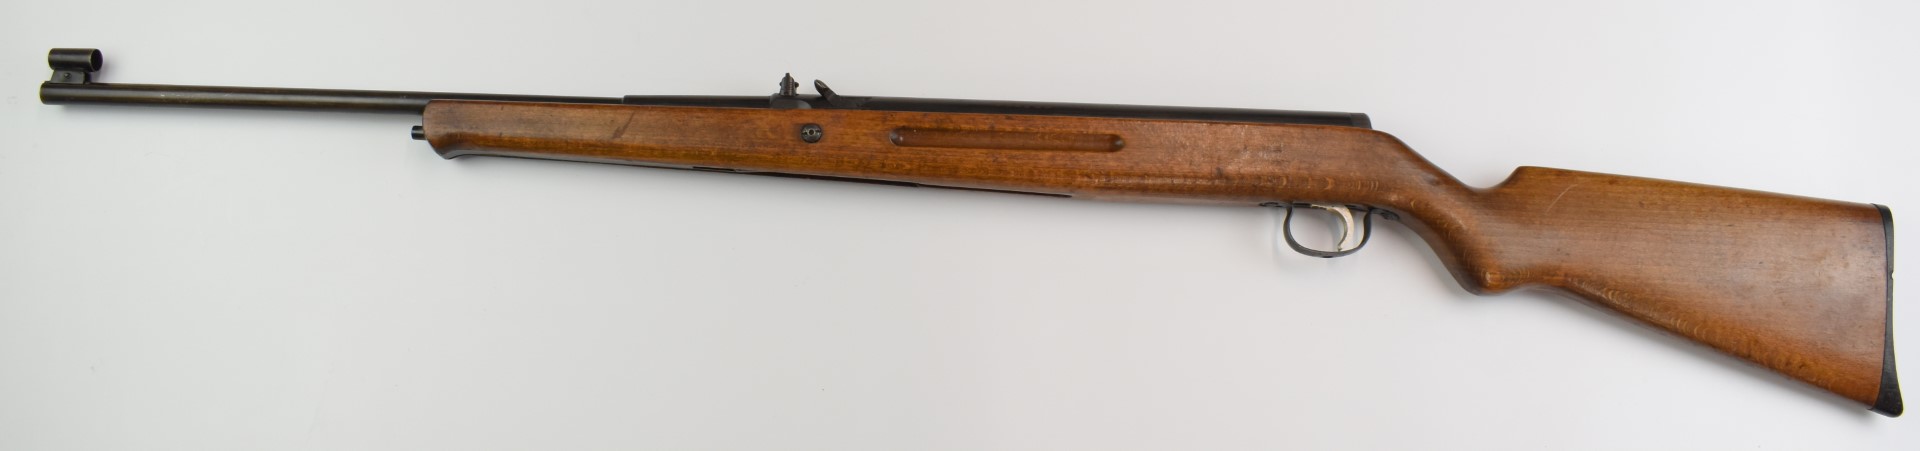 Original Mod 50E .22 under-lever air rifle with semi-pistol grip and adjustable sights and - Image 6 of 10